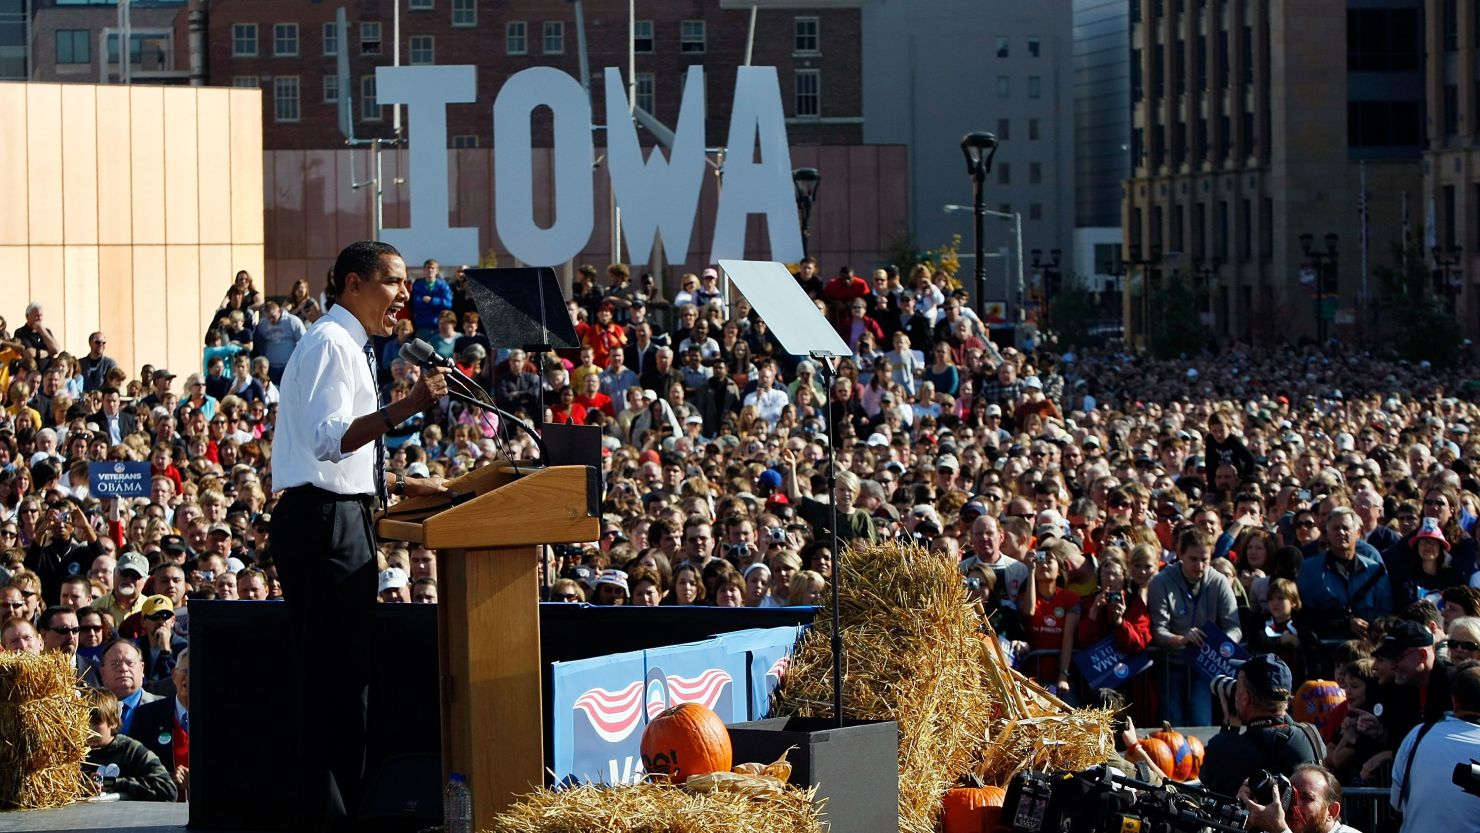 Barack Obama's win in the 2008 Iowa caucuses helped propel him on the road to the presidency.